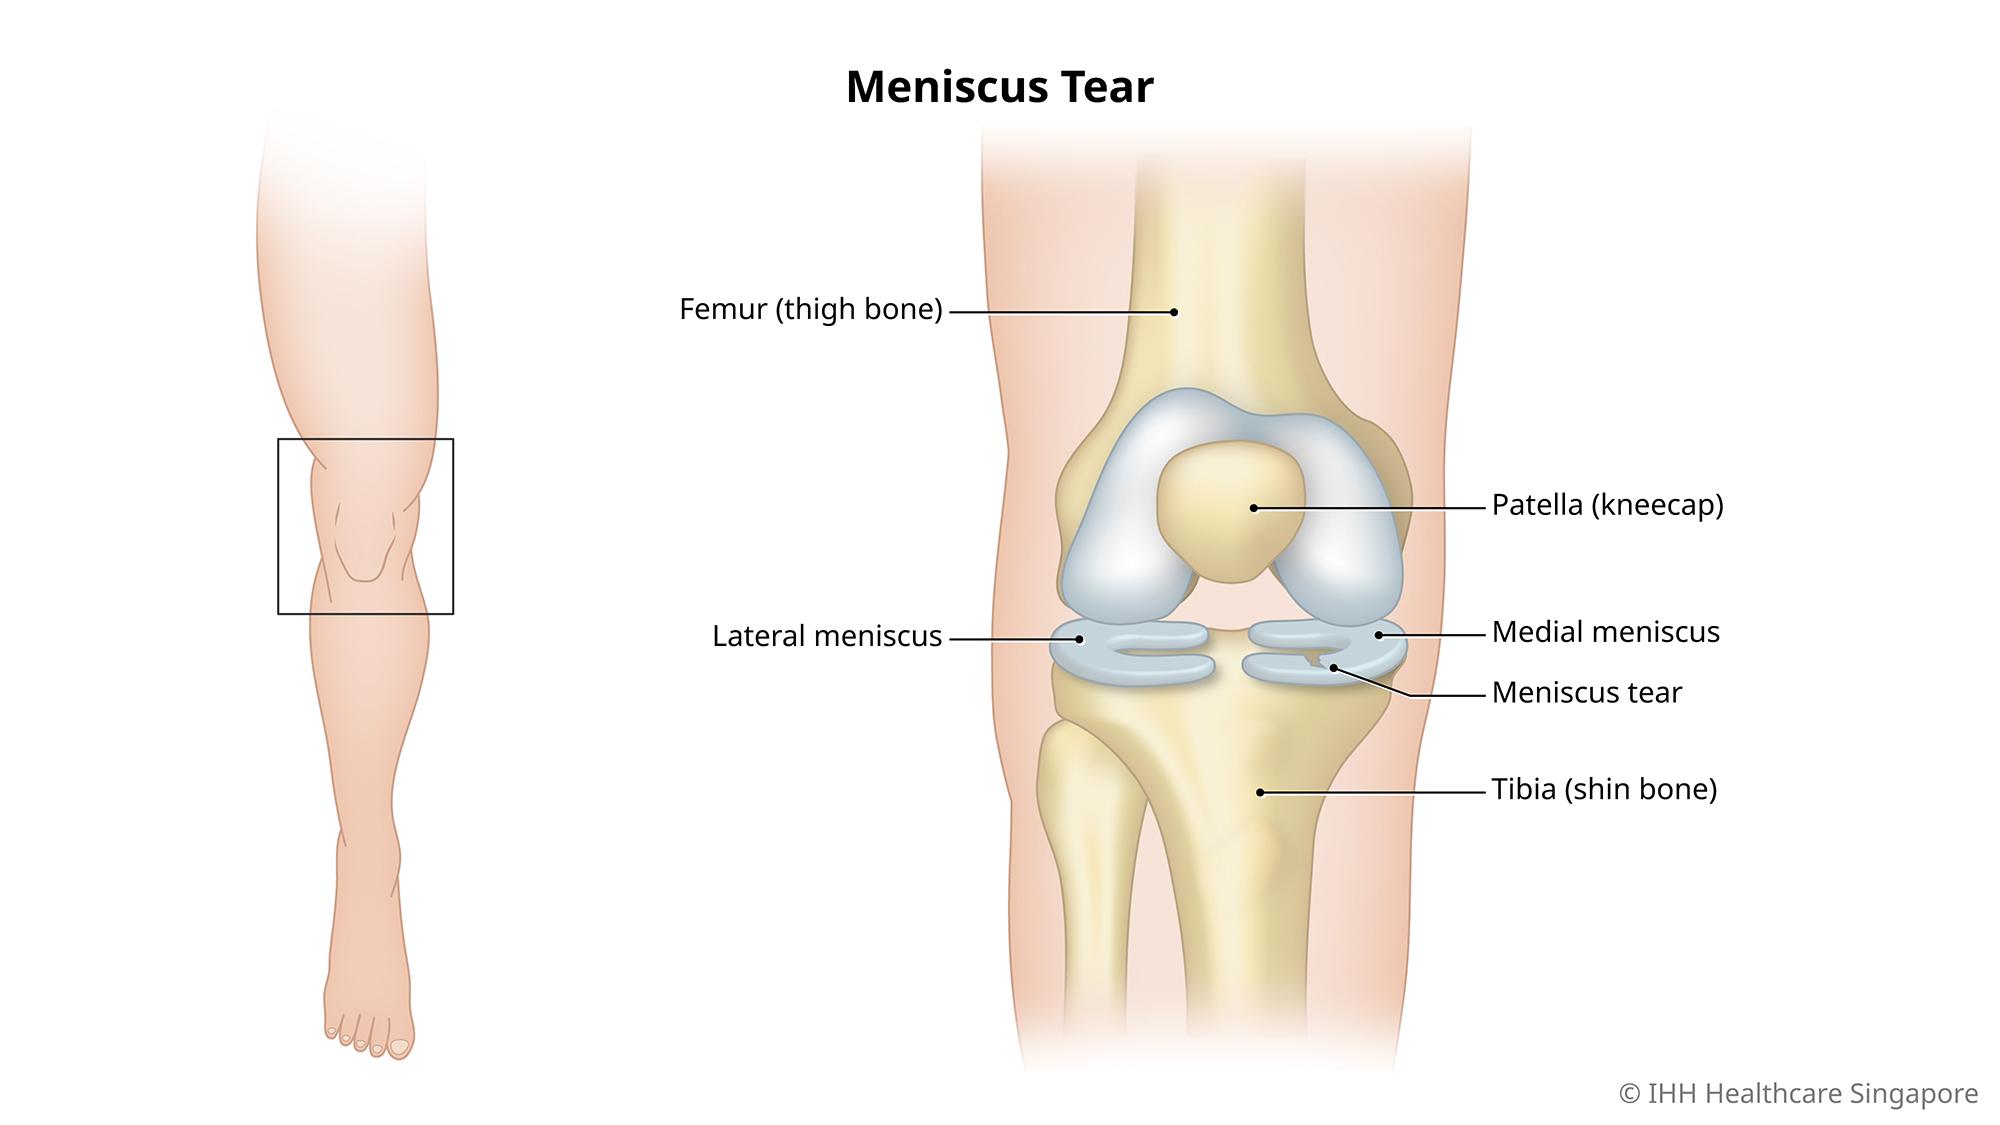 A meniscus tear occurs when one of the pieces of cartilage in the knee is injured and tears.